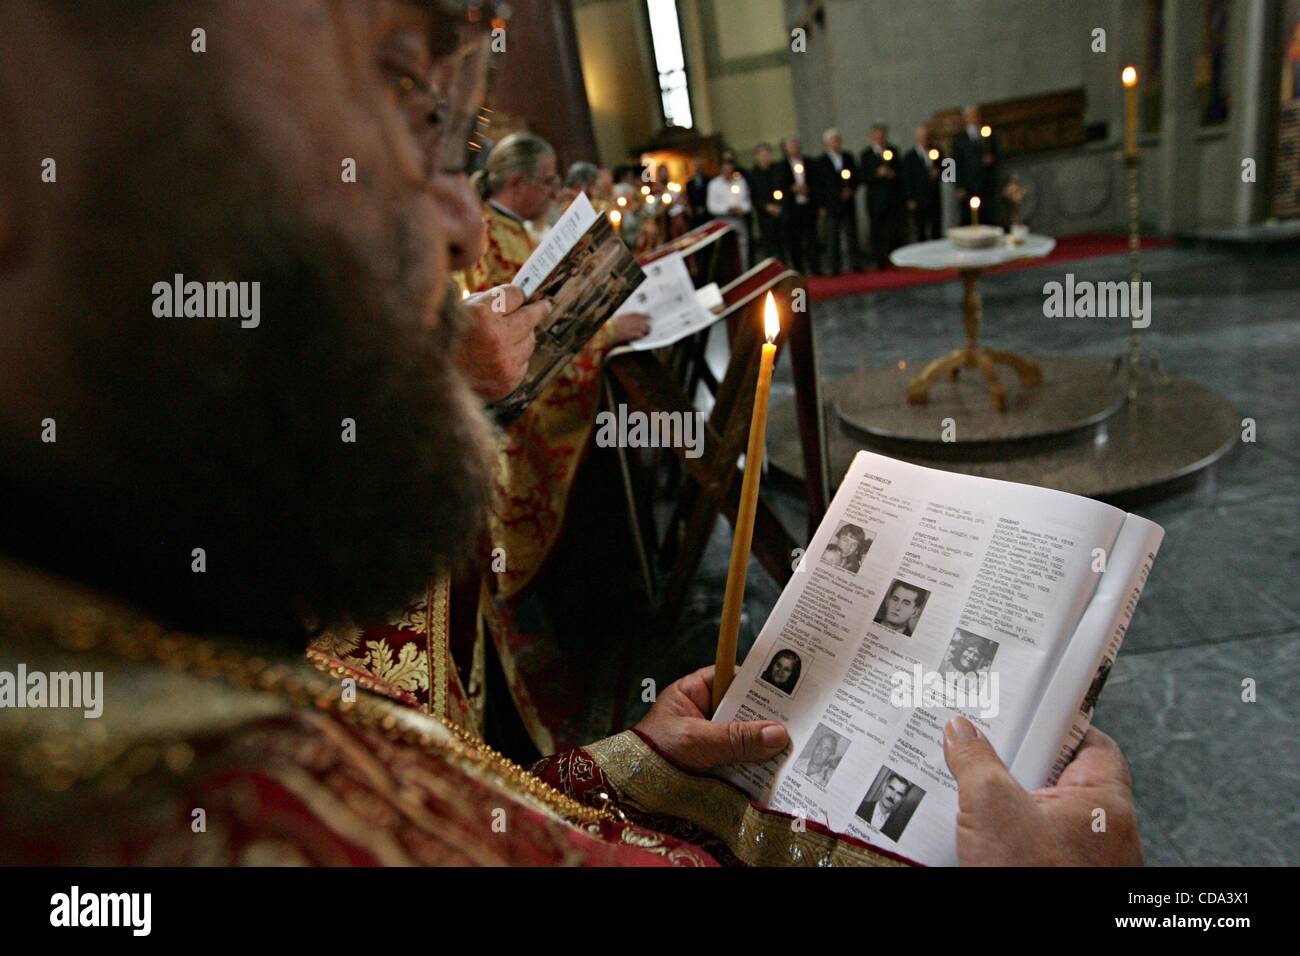 Aug 04, 2010 - Belgrade, Serbia - A priest is reading the names of the missing people during memorial service at the St. Marko church for the victims of the Croatia's military 'Operation Storm', marking the 15th anniversary. More than 200,000 Serbs fled the advancing Croatian troops in August 1995,  Stock Photo